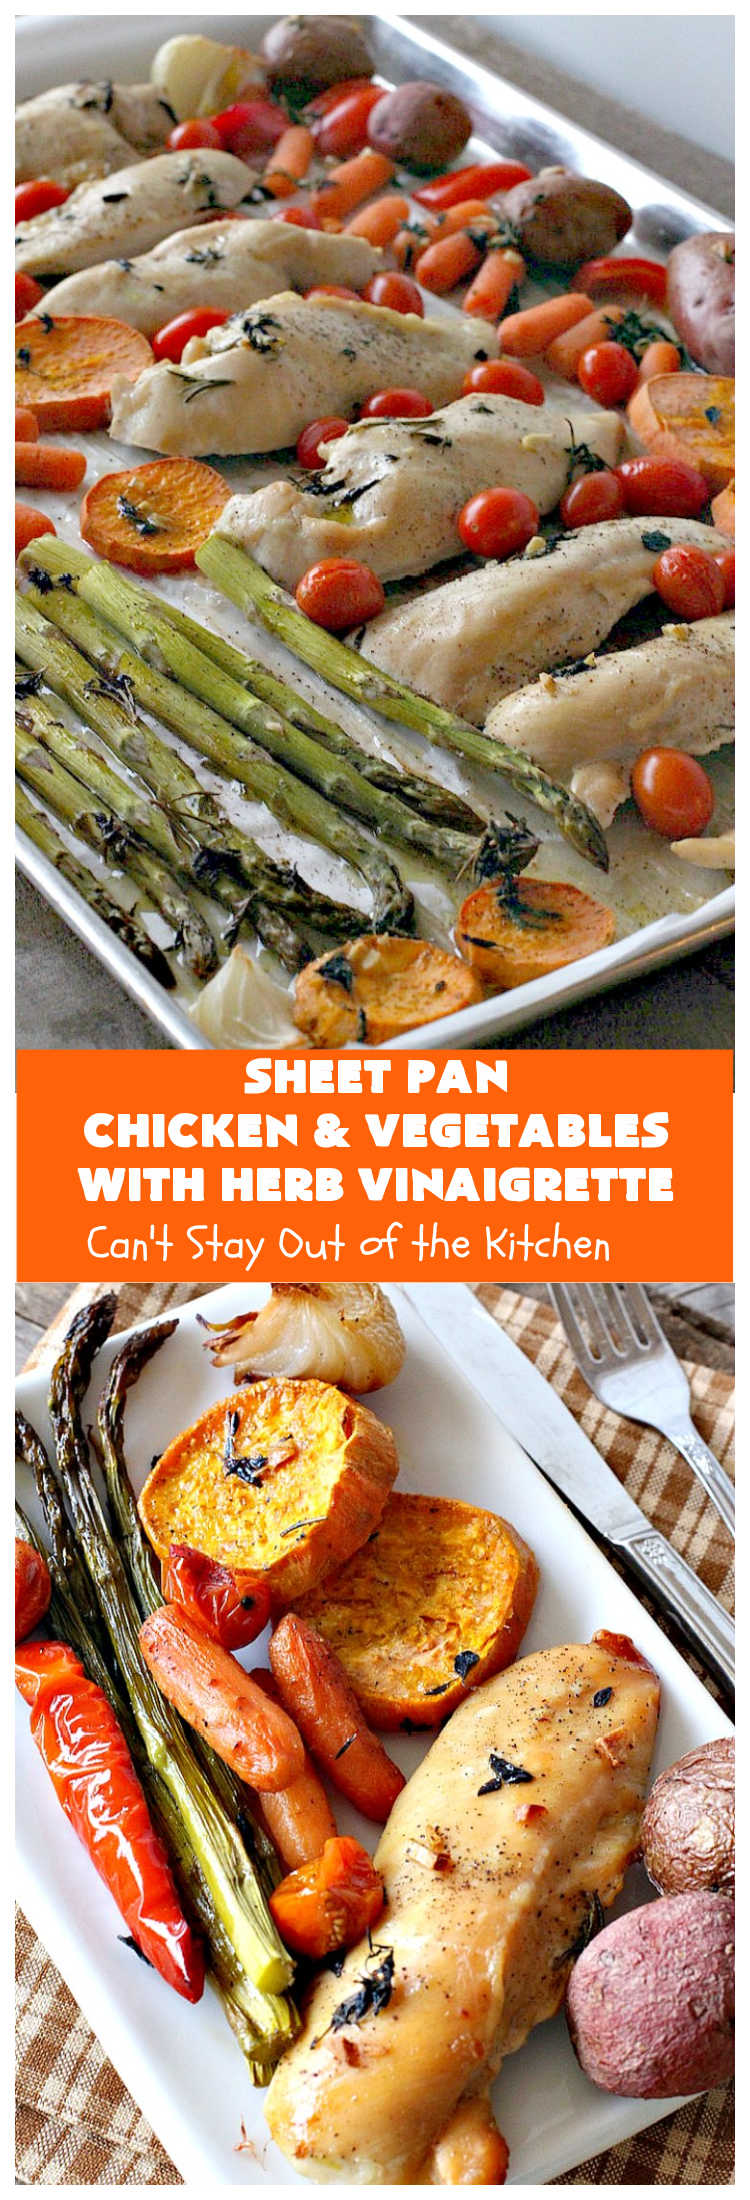 Sheet Pan Chicken and Vegetables with Herb Vinaigrette | Can't Stay Out of the Kitchen | this amazing one-dish meal has a delicious #HerbVinaigrette baked into the #chicken & #vegetables. Easy & delicious. #asparagus #potatoes #tomatoes #SweetPotatoes #healthy #LowCalorie #GlutenFree #SheetPanDinner #EasyOneDishMeal #SheetPanChickenAndVegetablesWithHerbVinaigrette